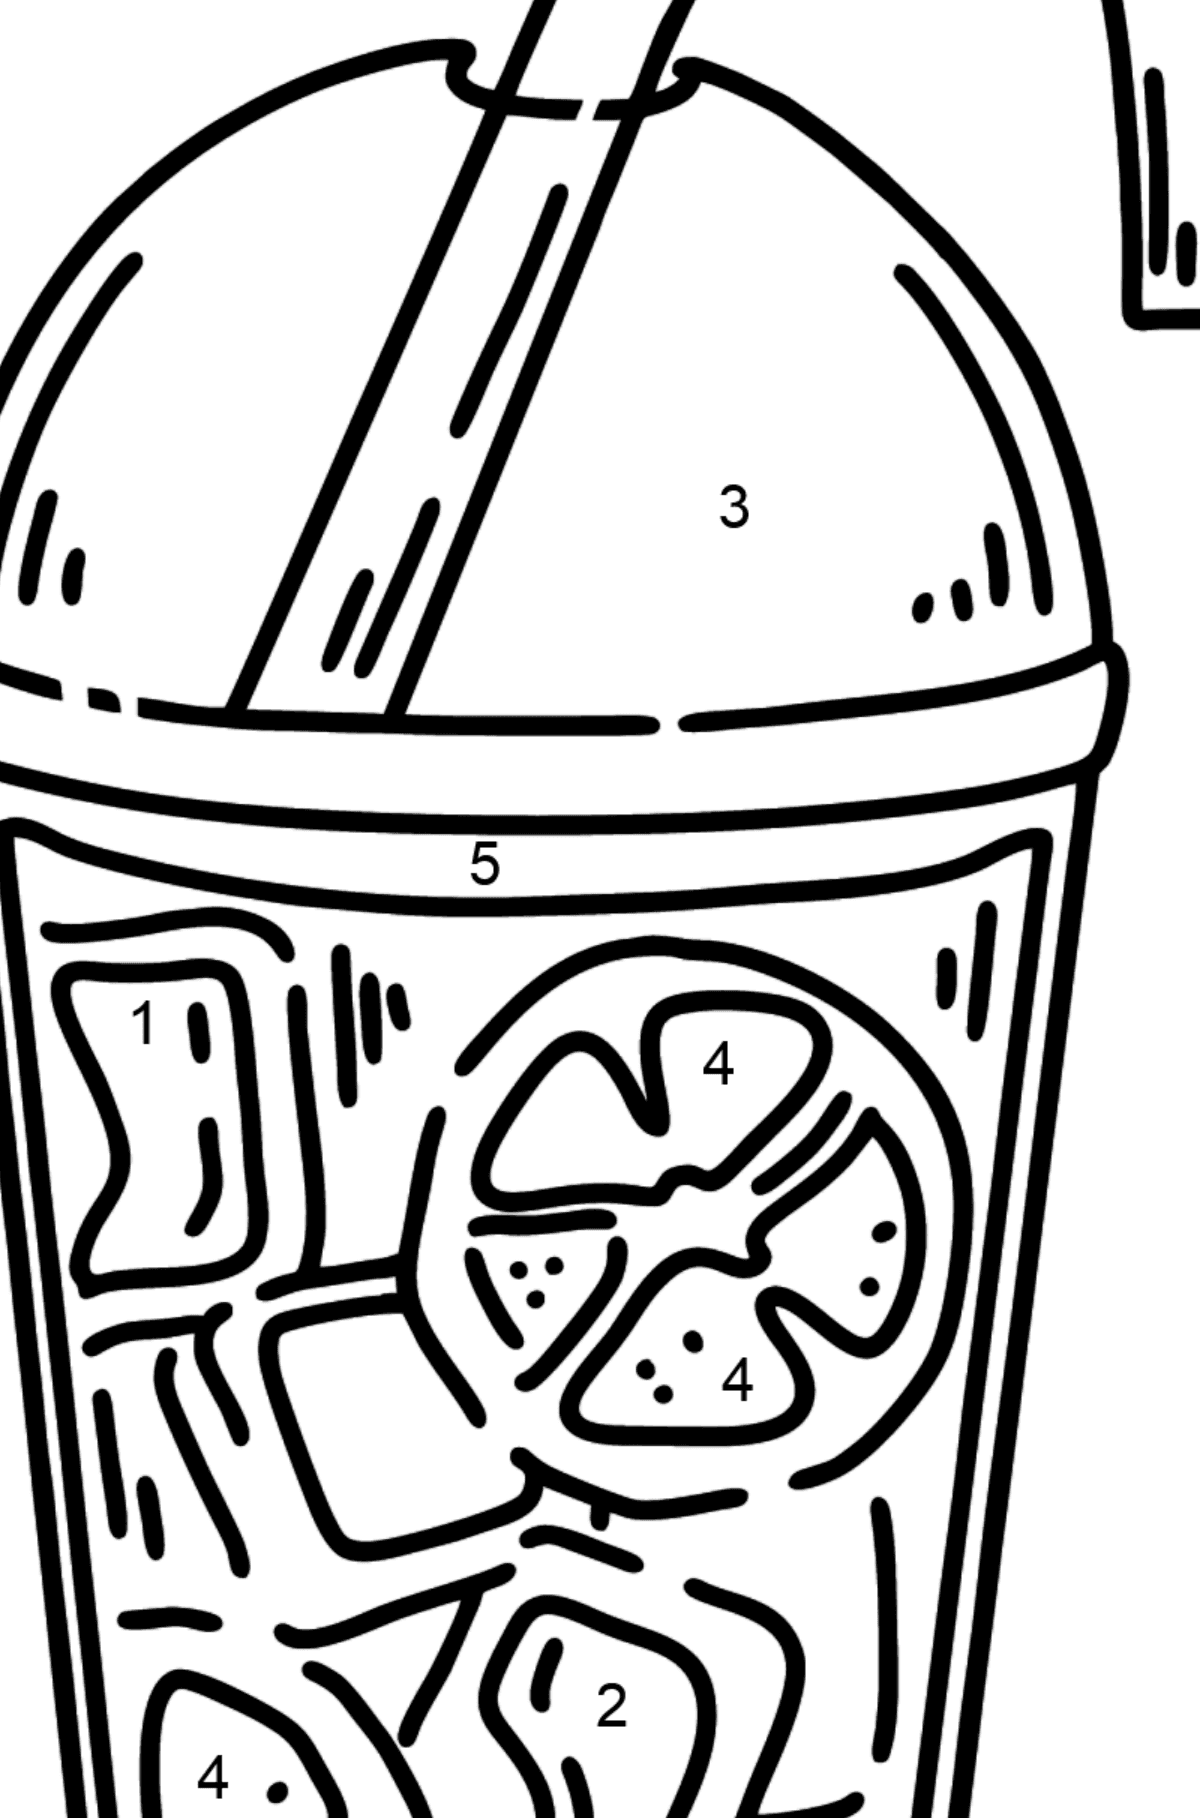 Lemonade in a Glass coloring page - Coloring by Numbers for Kids